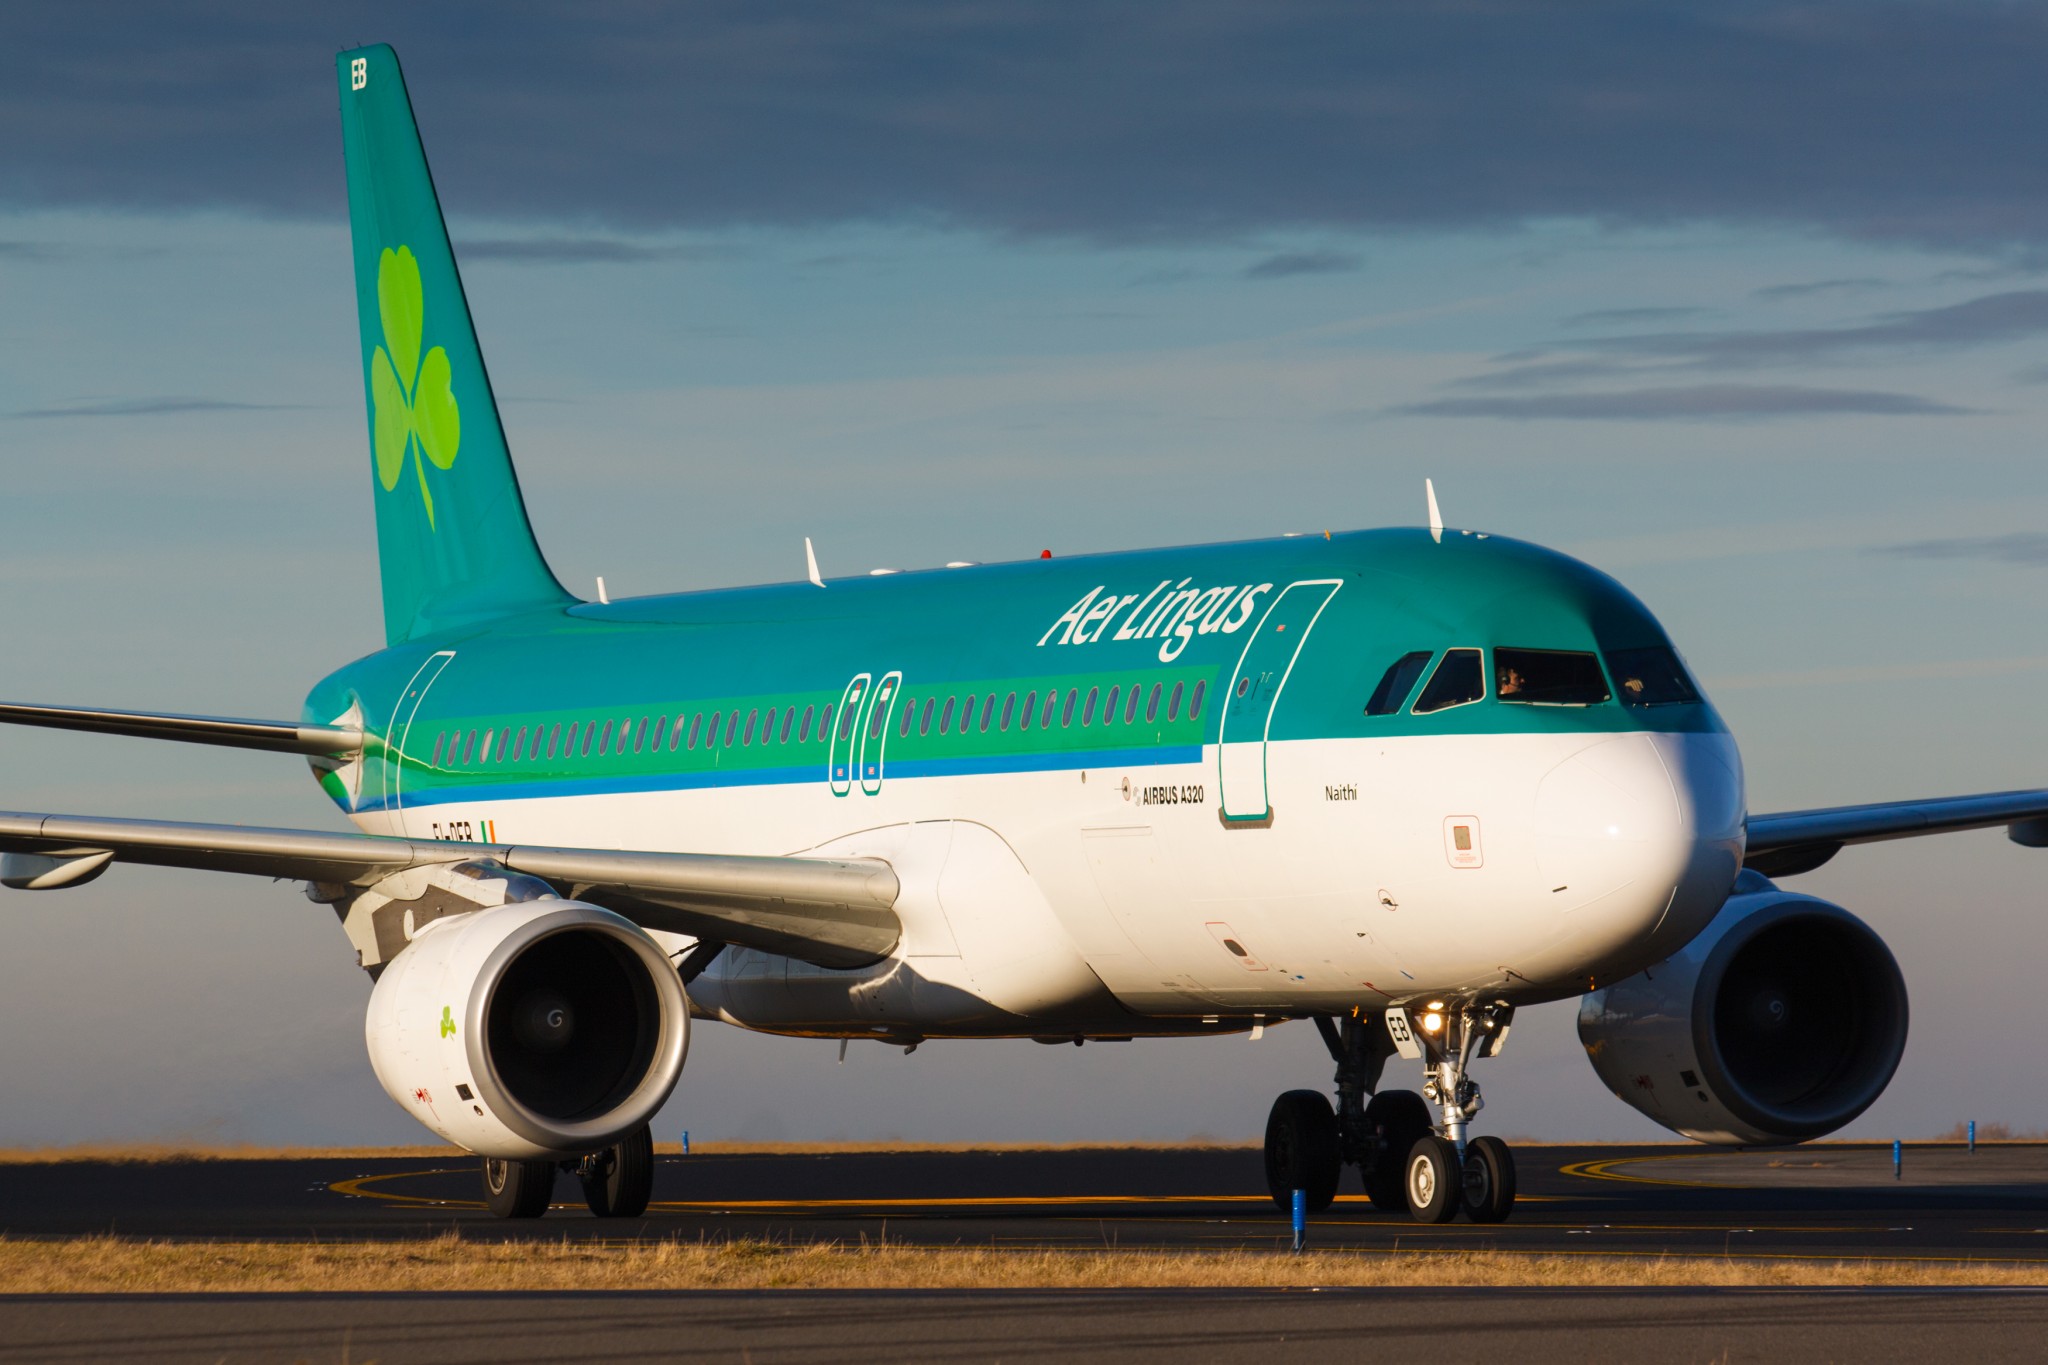 Aer Lingus launches new loyalty programme